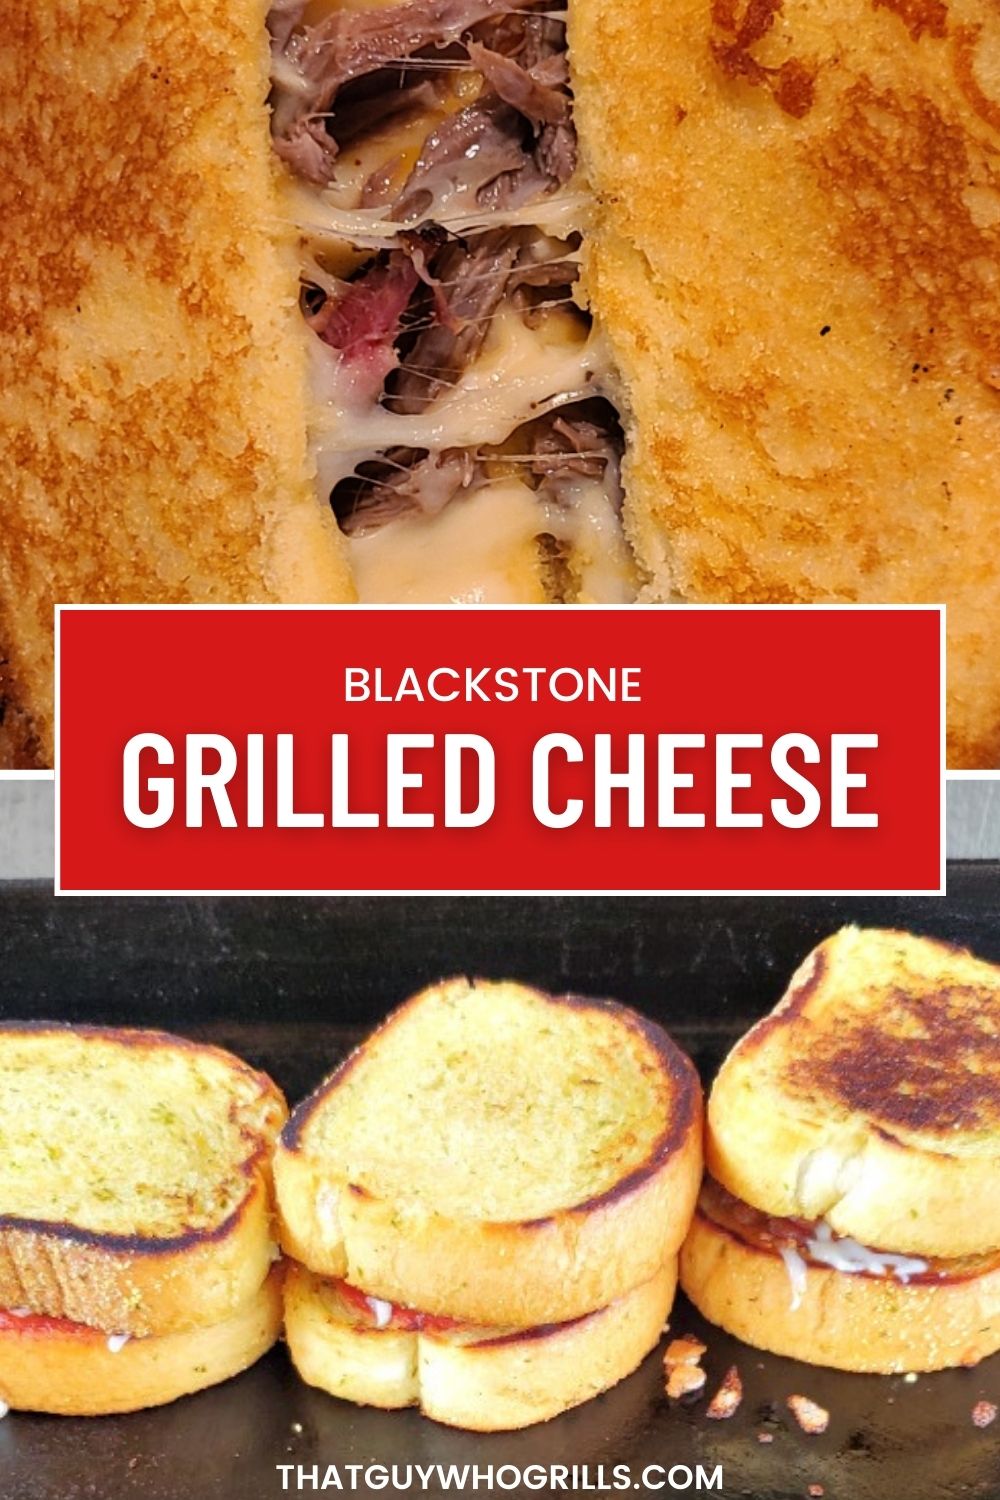 Blackstone Grilled Cheese Recipes!